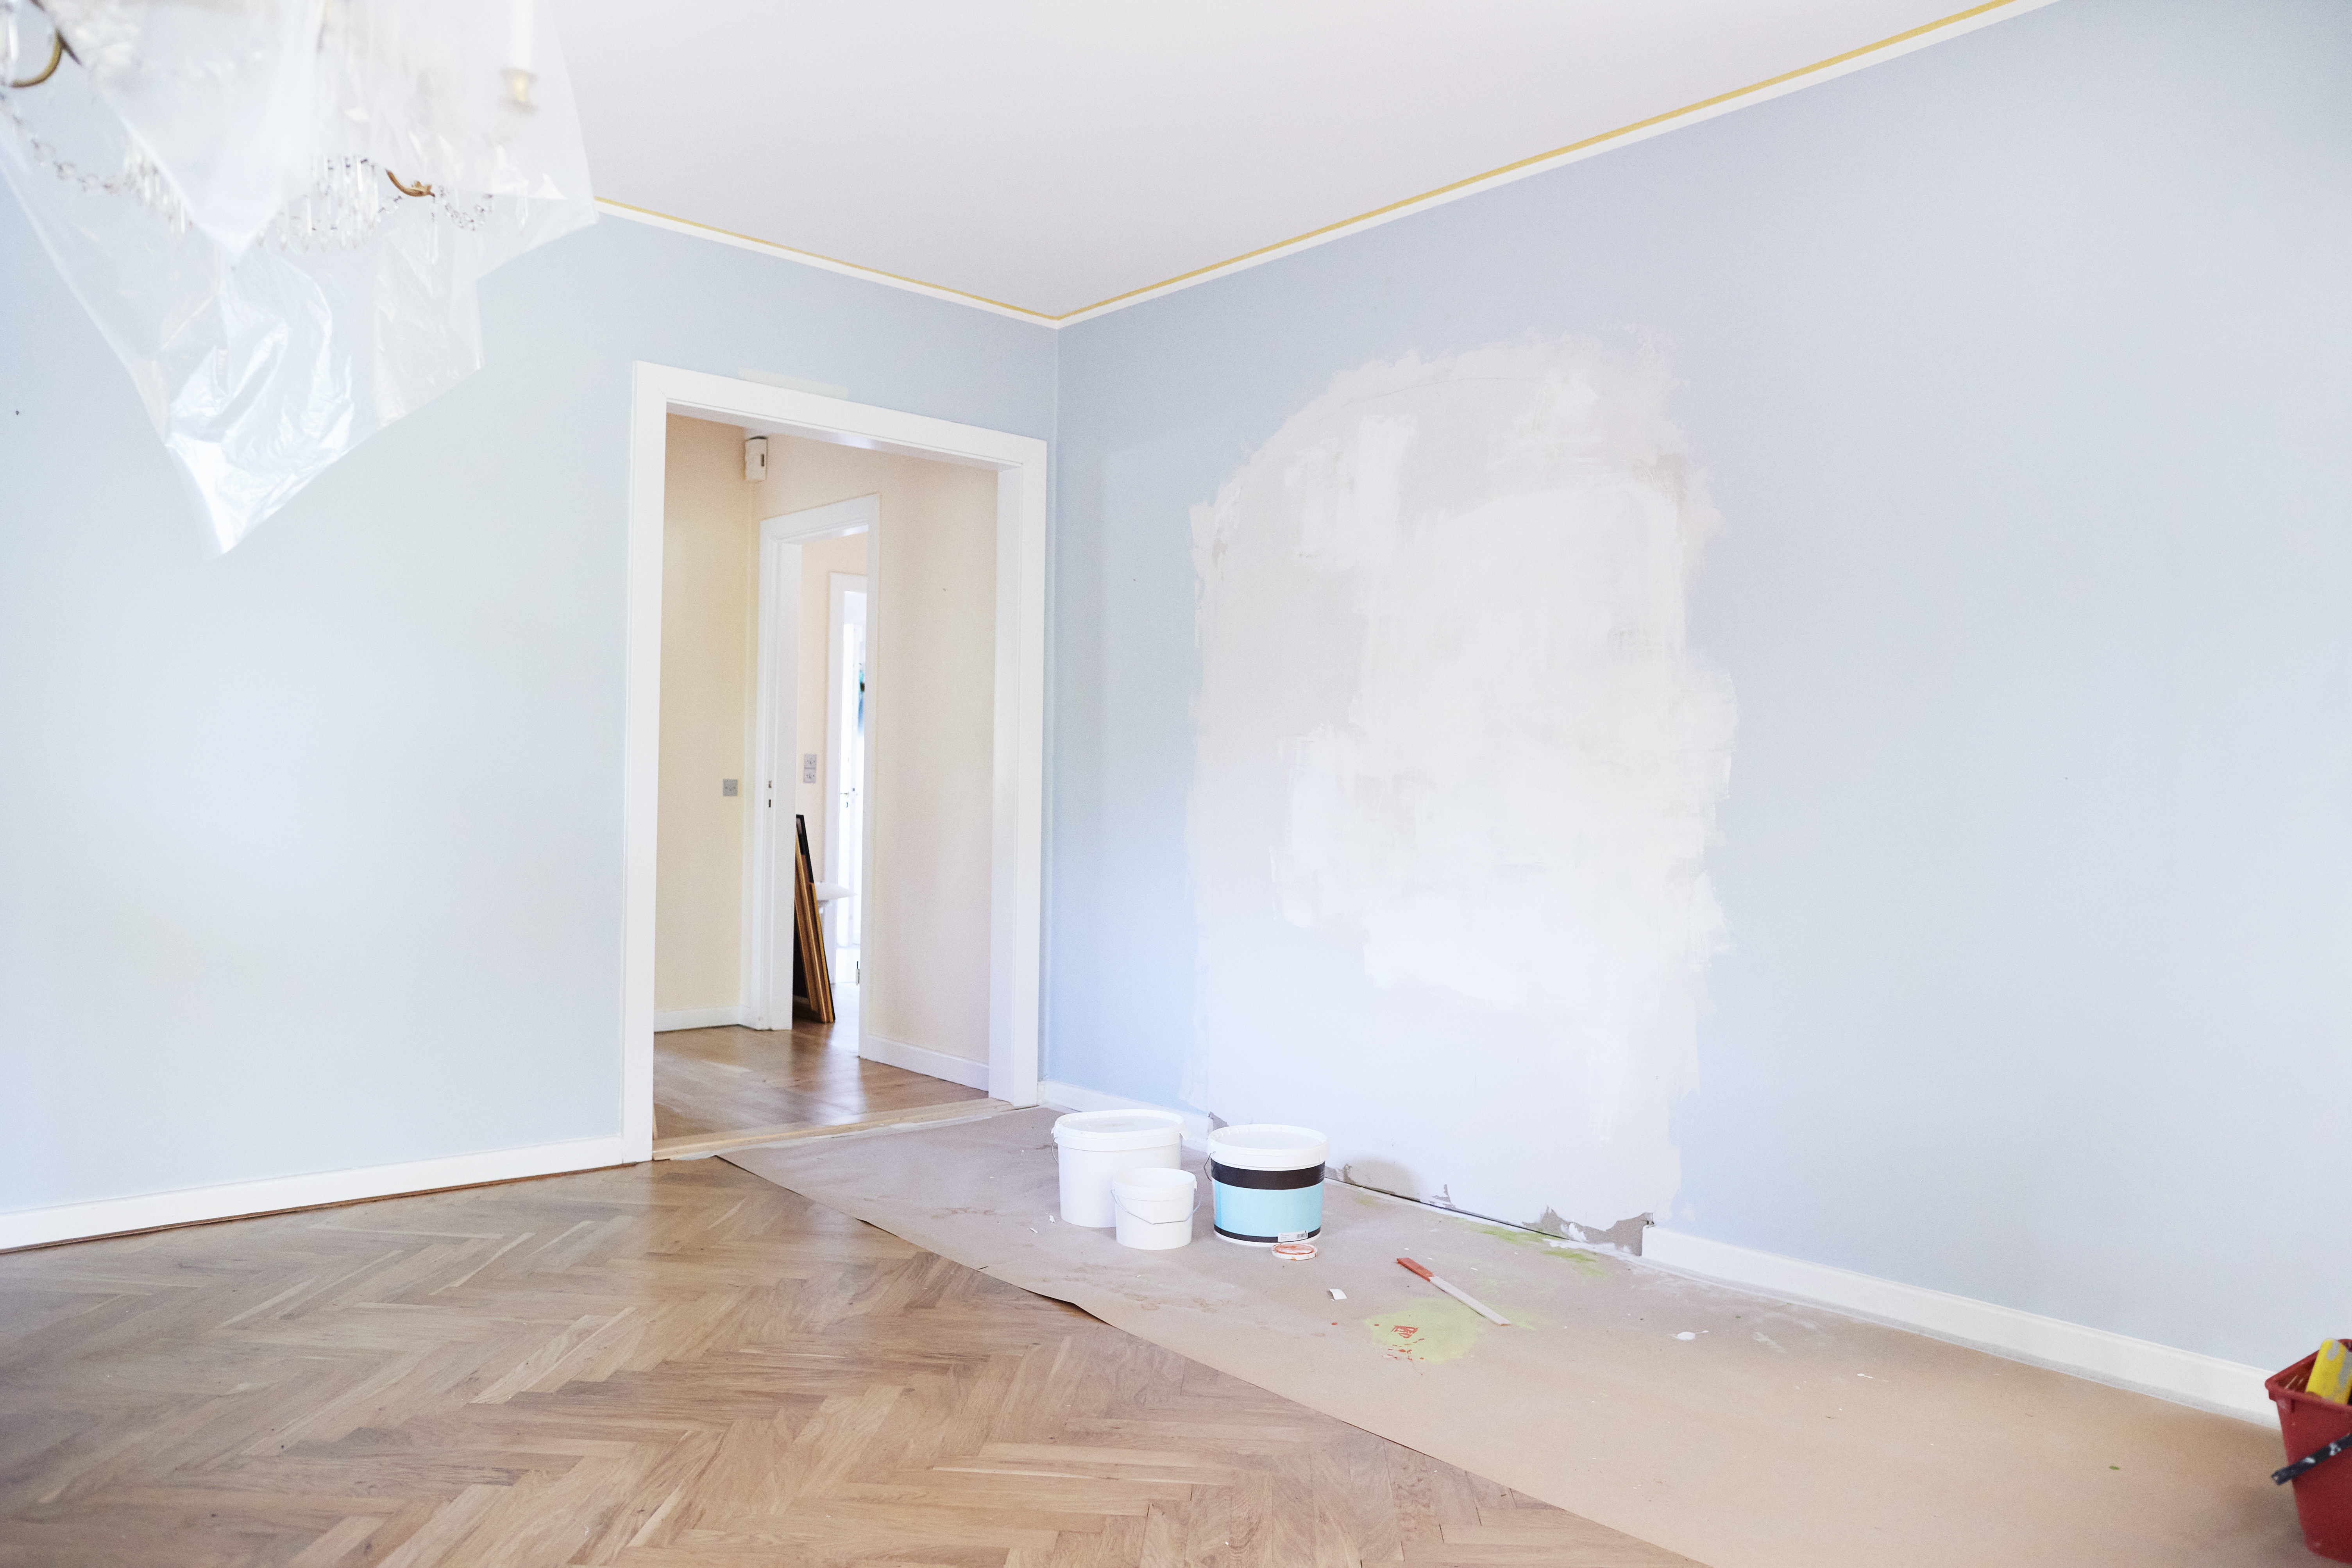 A renovated living room with freshly painted walls  | Source: Getty Images